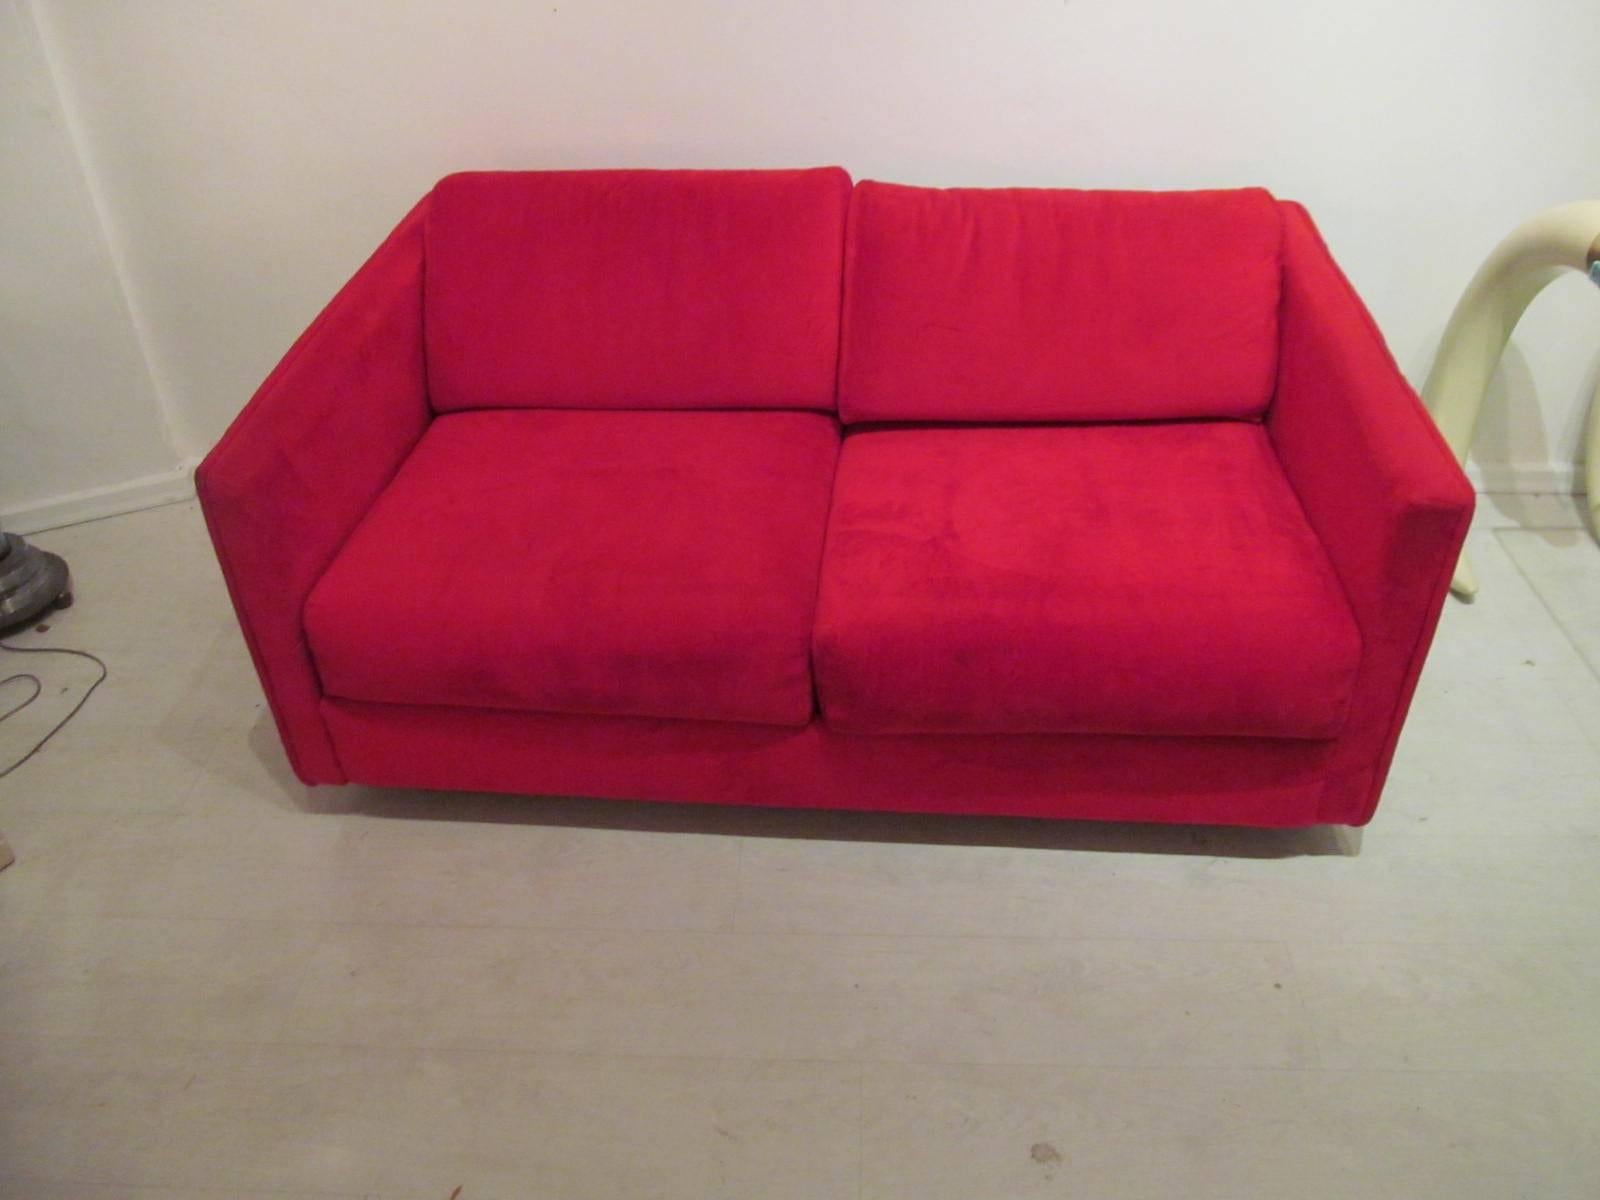 Late 20th Century Brutalist Paul Evans Style Loveseat by Adrian Pearsall for Craft Associates